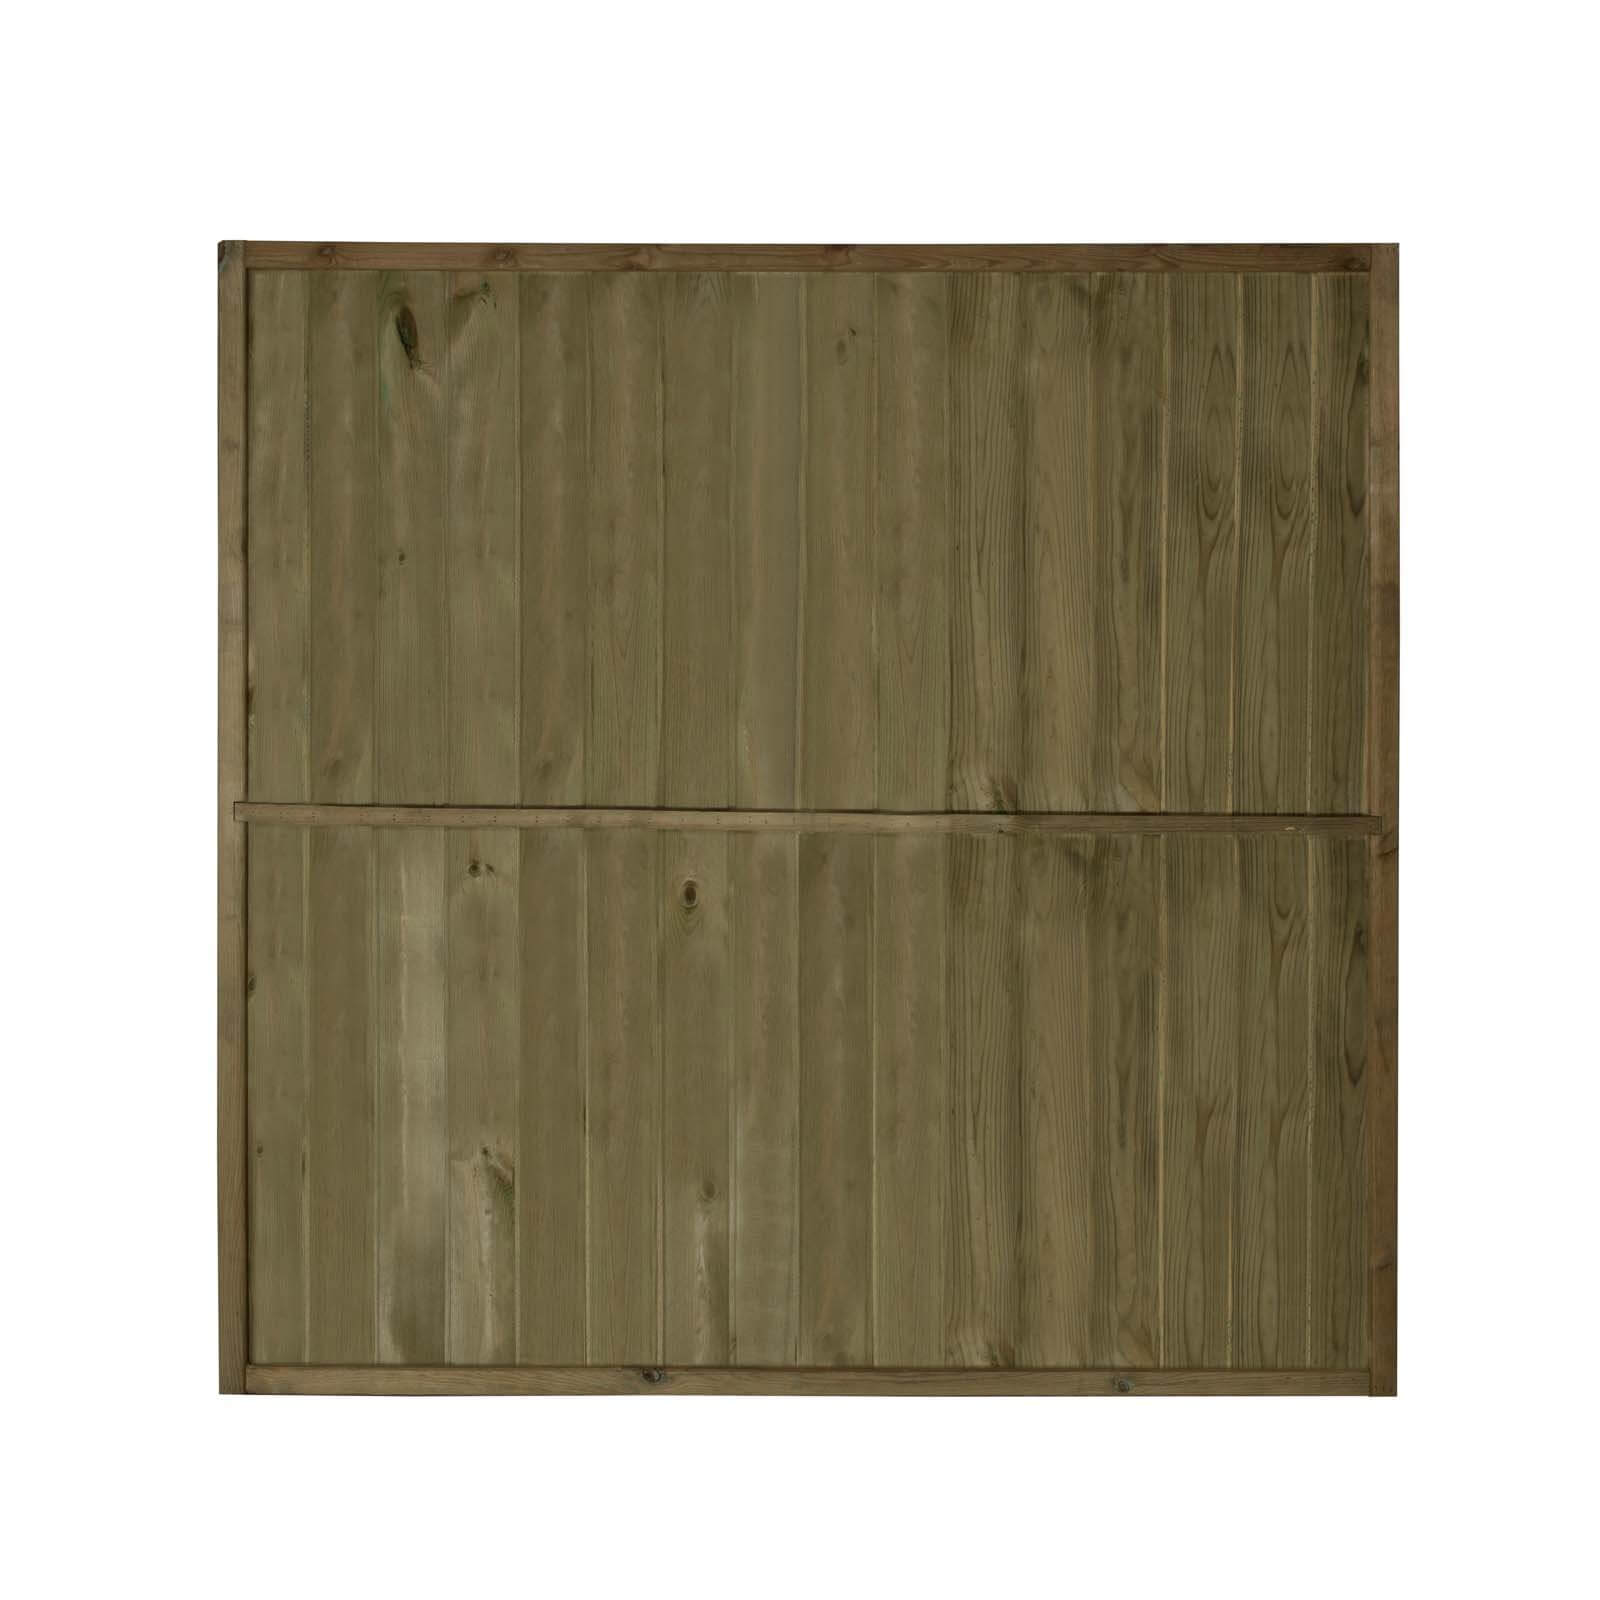 Timberdale Square Board Panel - 1828 x 1828 x 47mm